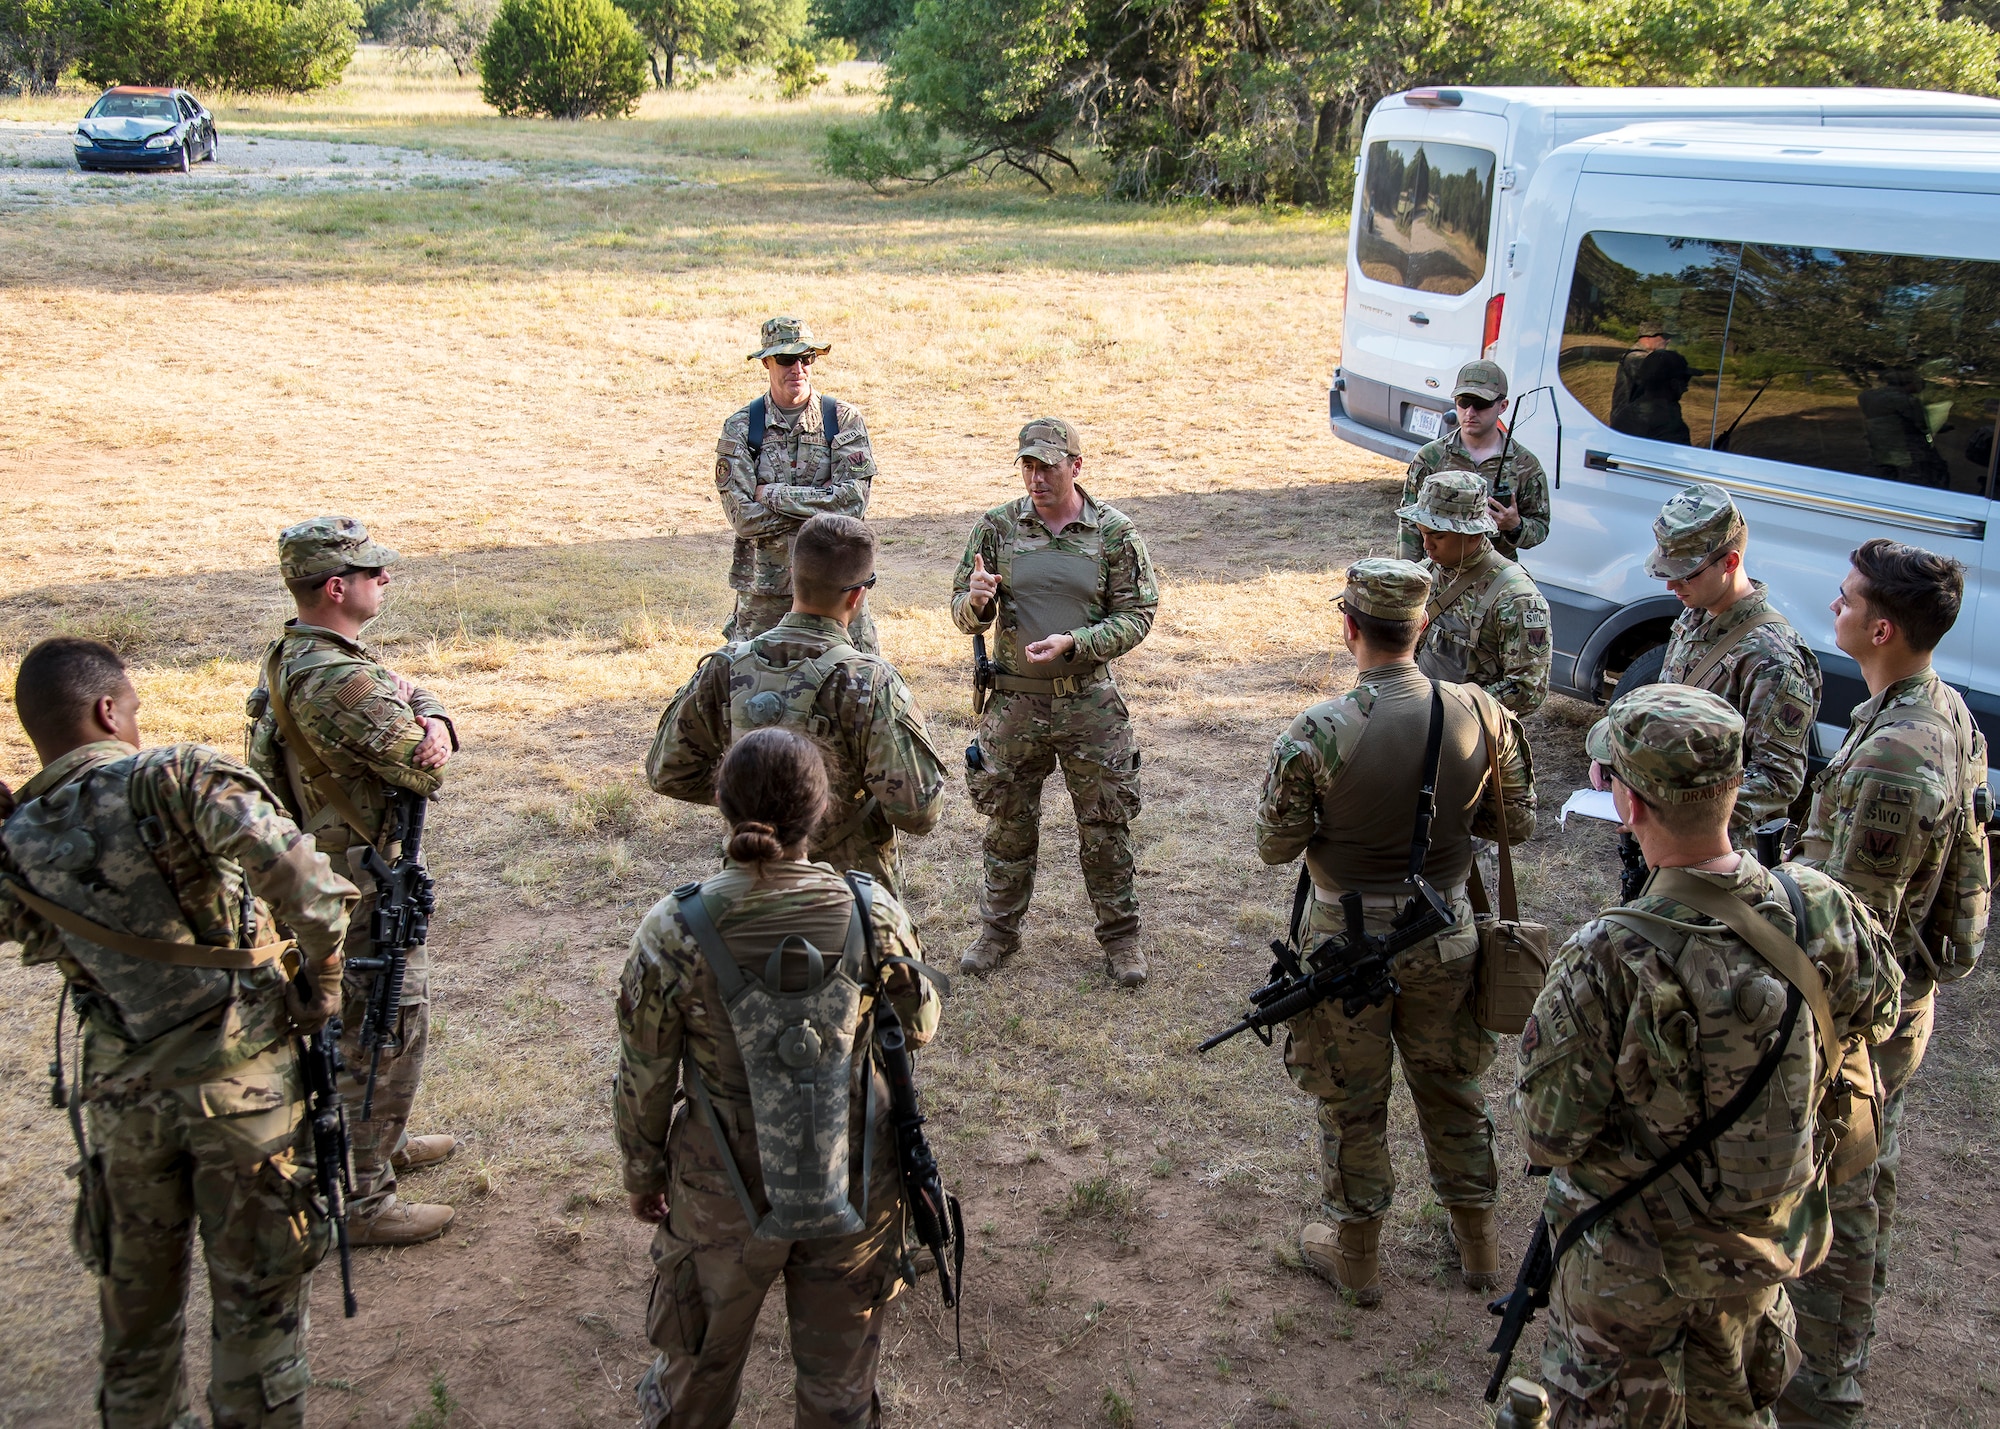 Master Sgt. Charles Kuykendall, center, 3d Weather Squadron operations superintendent, gives instruction during a certification field exercise (CFX), July 31, 2019, at Camp Bowie Training Center, Texas. The CFX was designed to evaluate the squadron’s overall tactical ability and readiness to provide the U.S. Army with full spectrum environmental support to the Joint Task Force (JTF) fight. The CFX immersed Airmen into all the aspects of what could come with a deployment such as Land Navigation. (U.S. Air Force photo by Airman 1st Class Eugene Oliver)